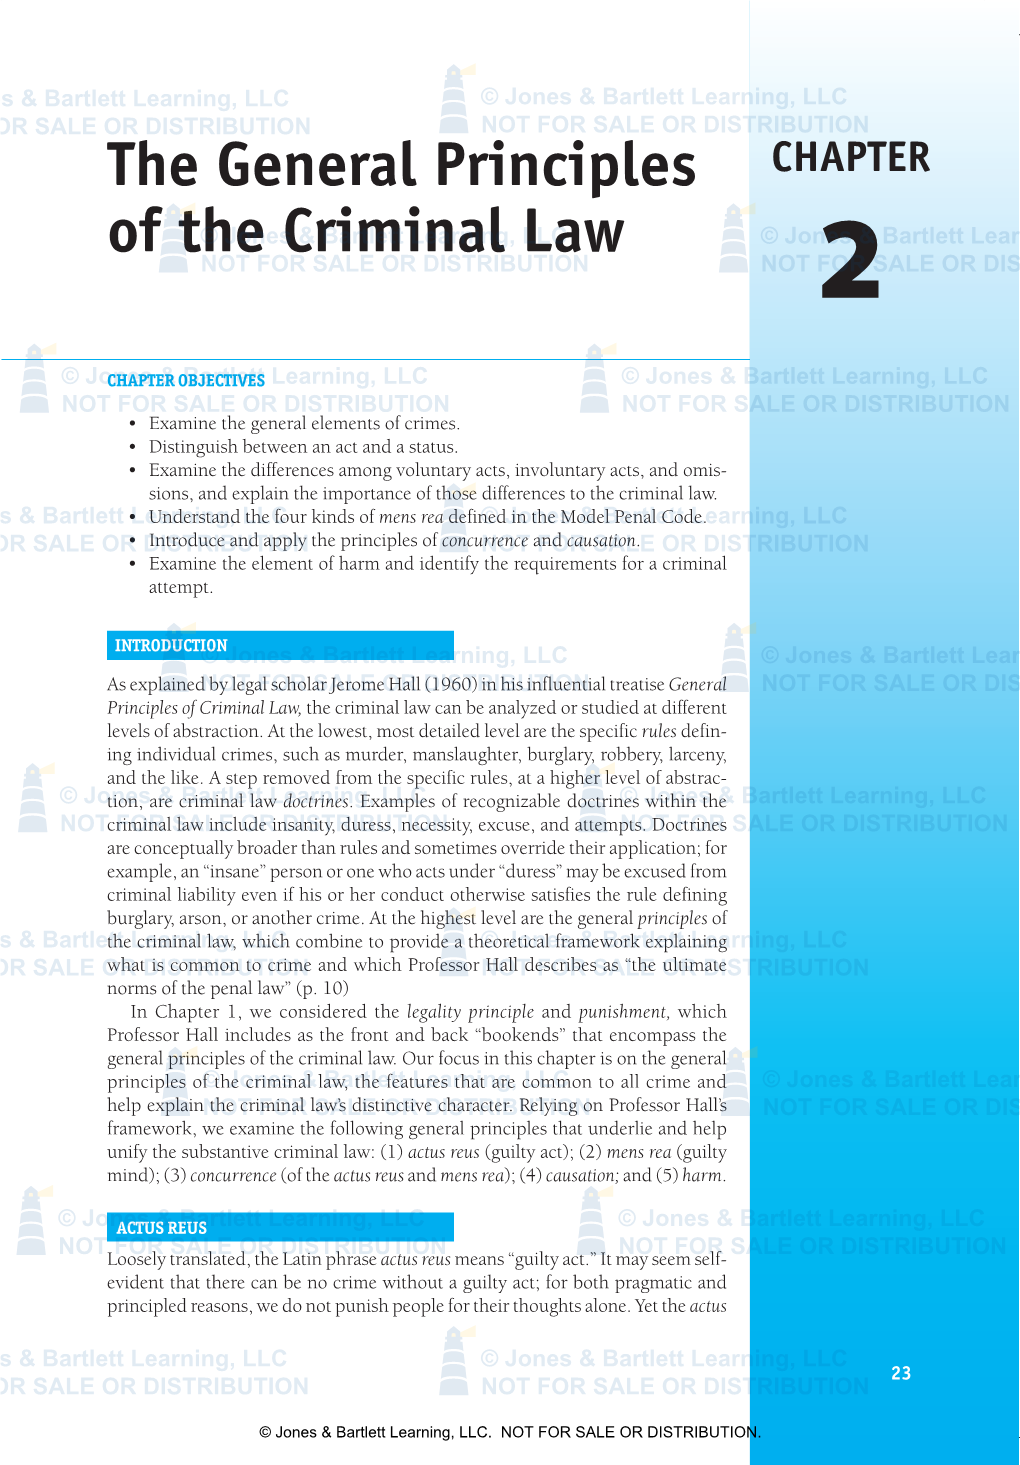 The General Principles of the Criminal Law